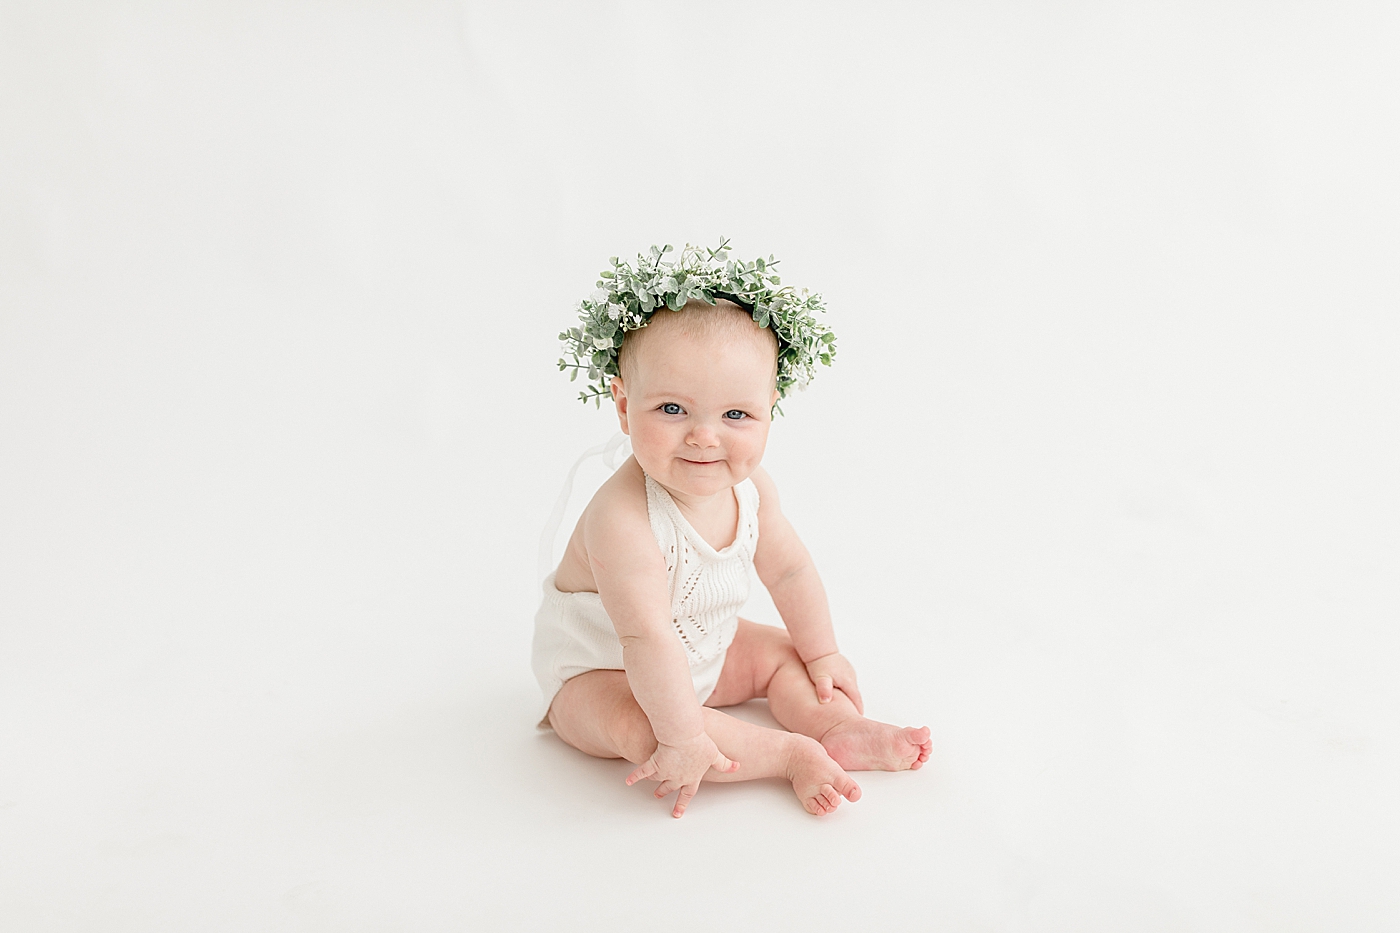 Baby girl with flower crown. Photo by Brittany Elise Photography.